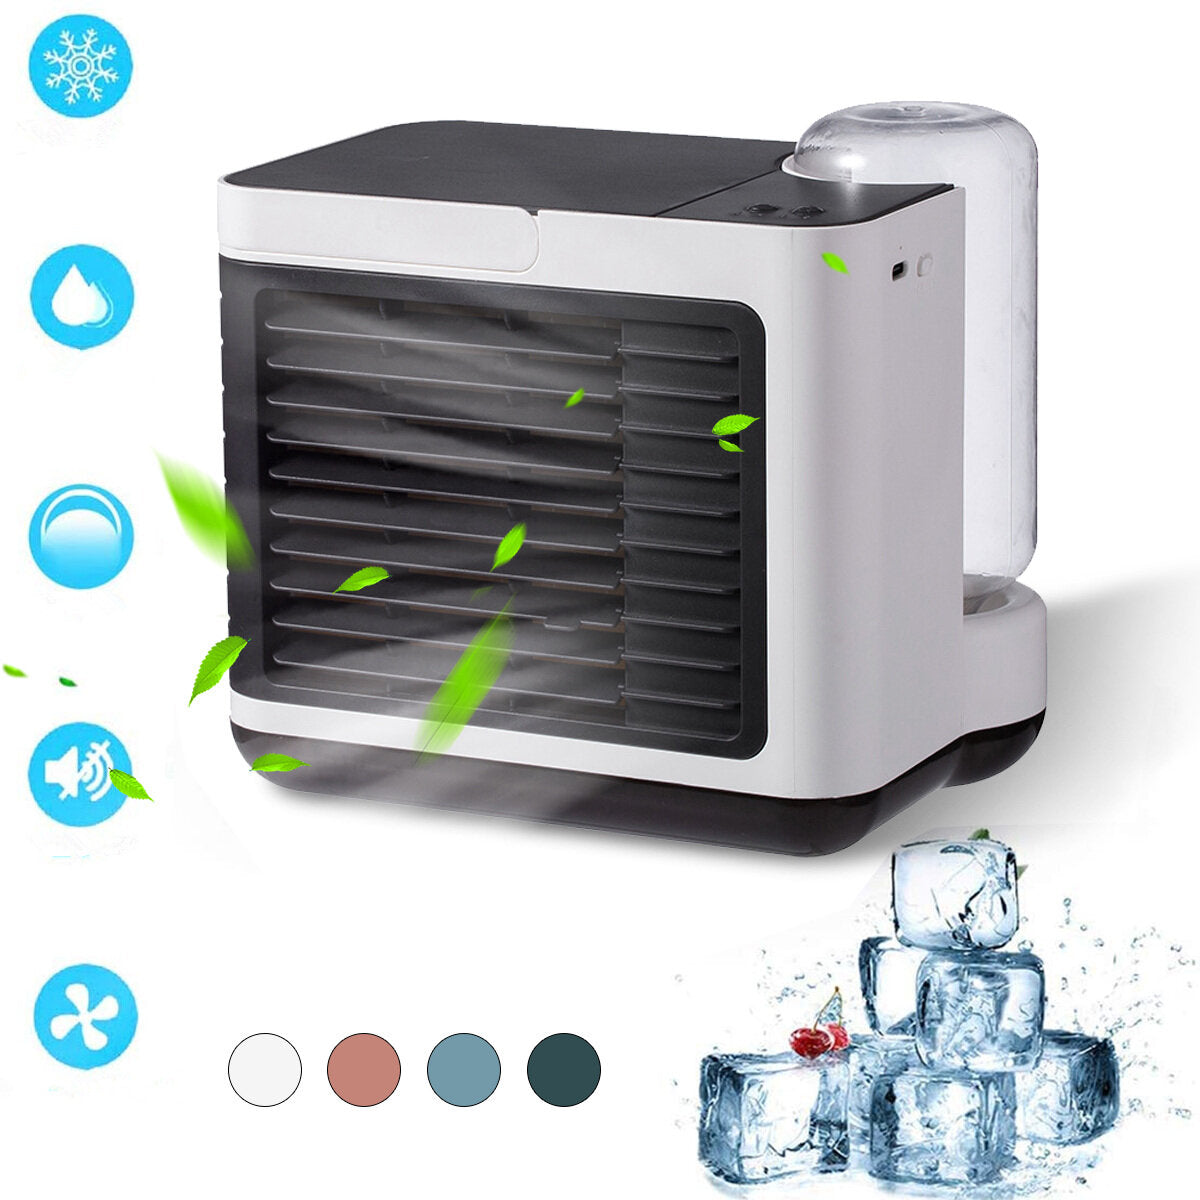 2000mAh USB Fan Portable Negative Ion Air Conditioning Fan Desktop Air Cooler Small Water Cooling Fan with 3 Wind Speeds